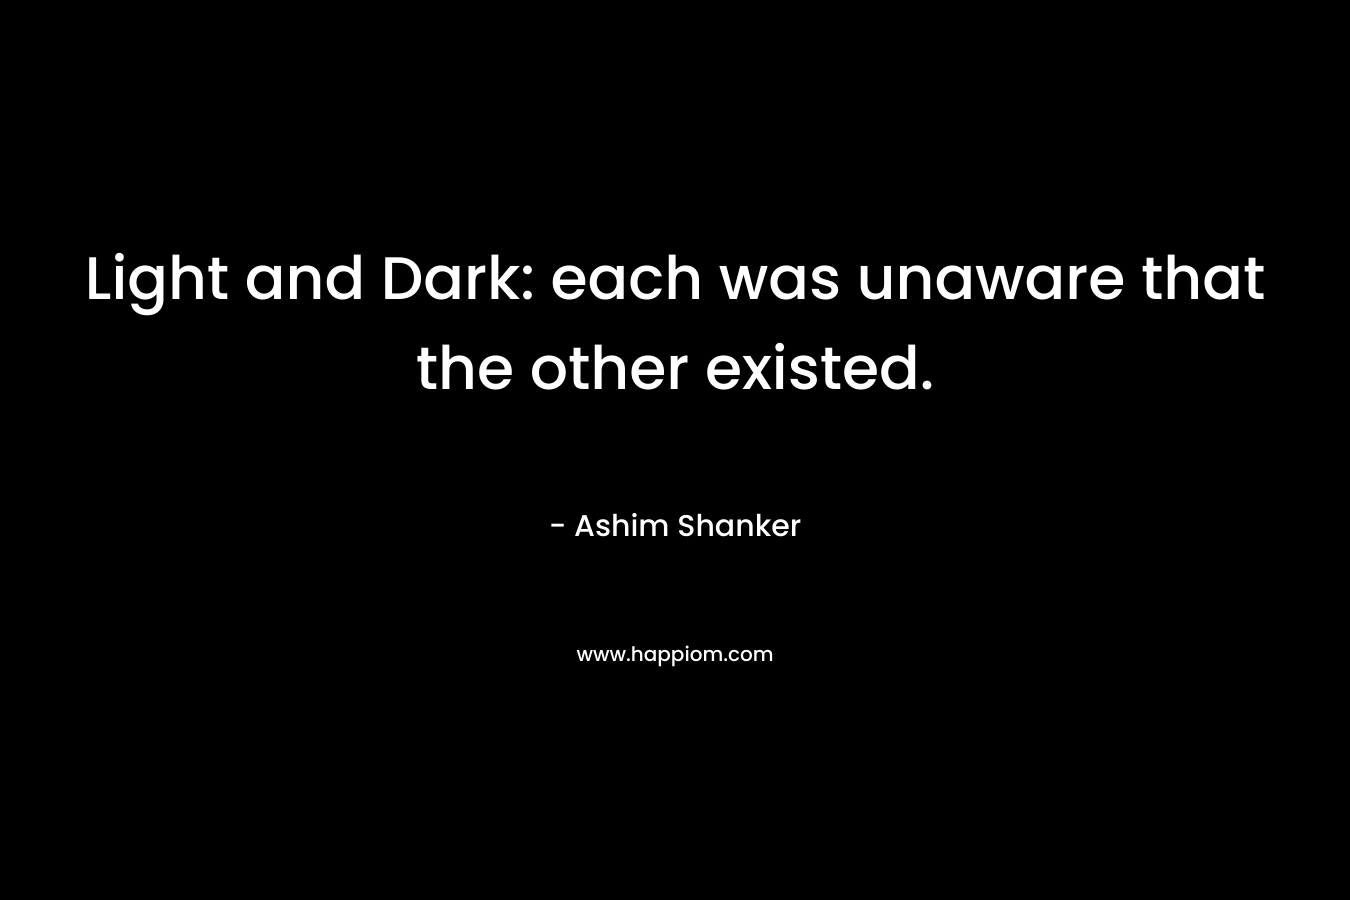 Light and Dark: each was unaware that the other existed. – Ashim Shanker